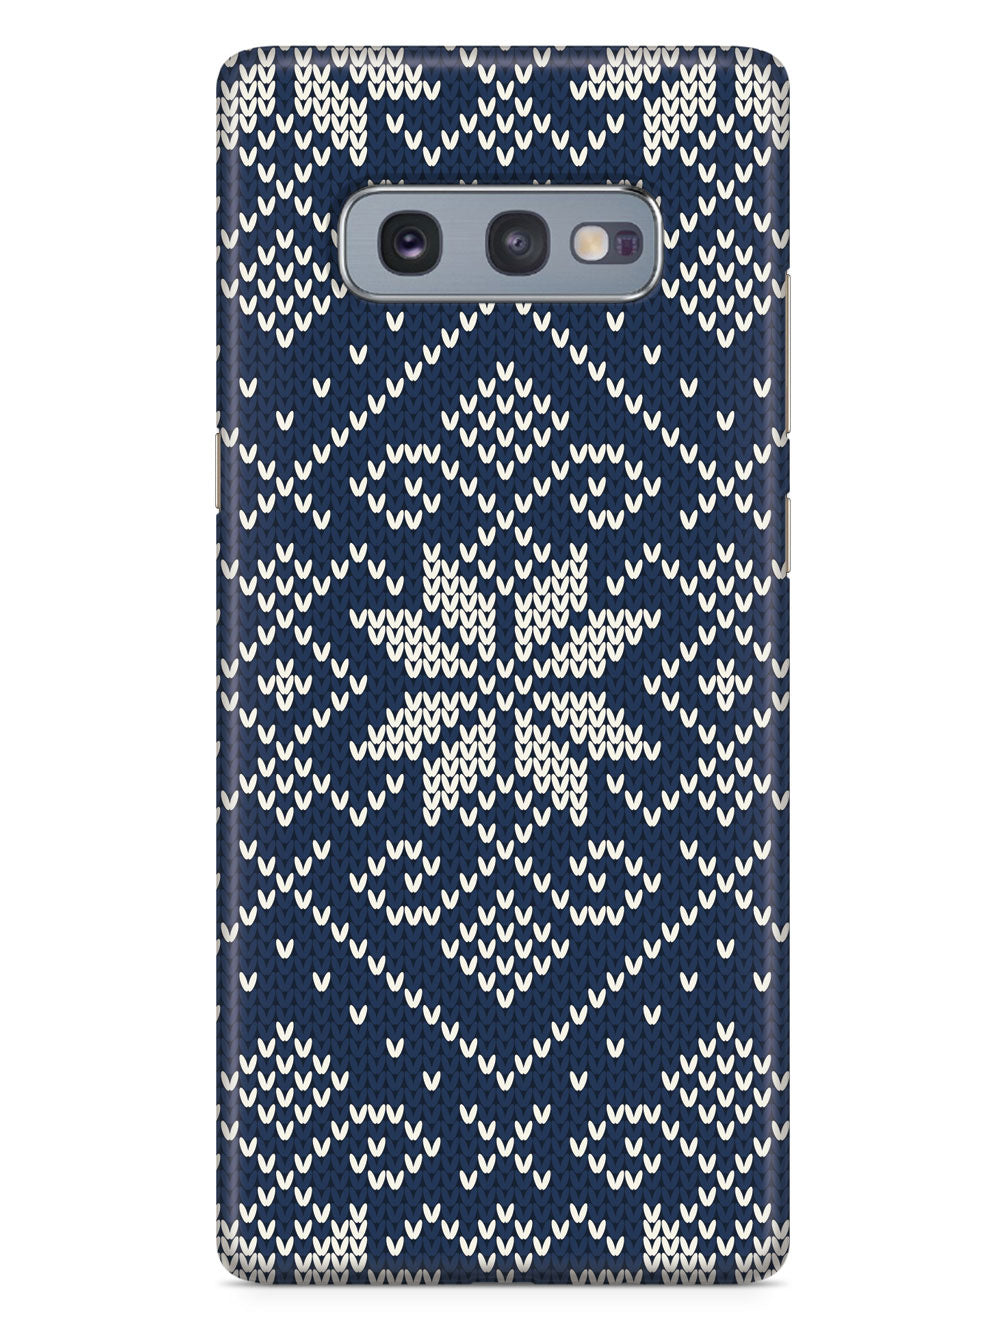 Blue and White Sweater Texturized - Black Case